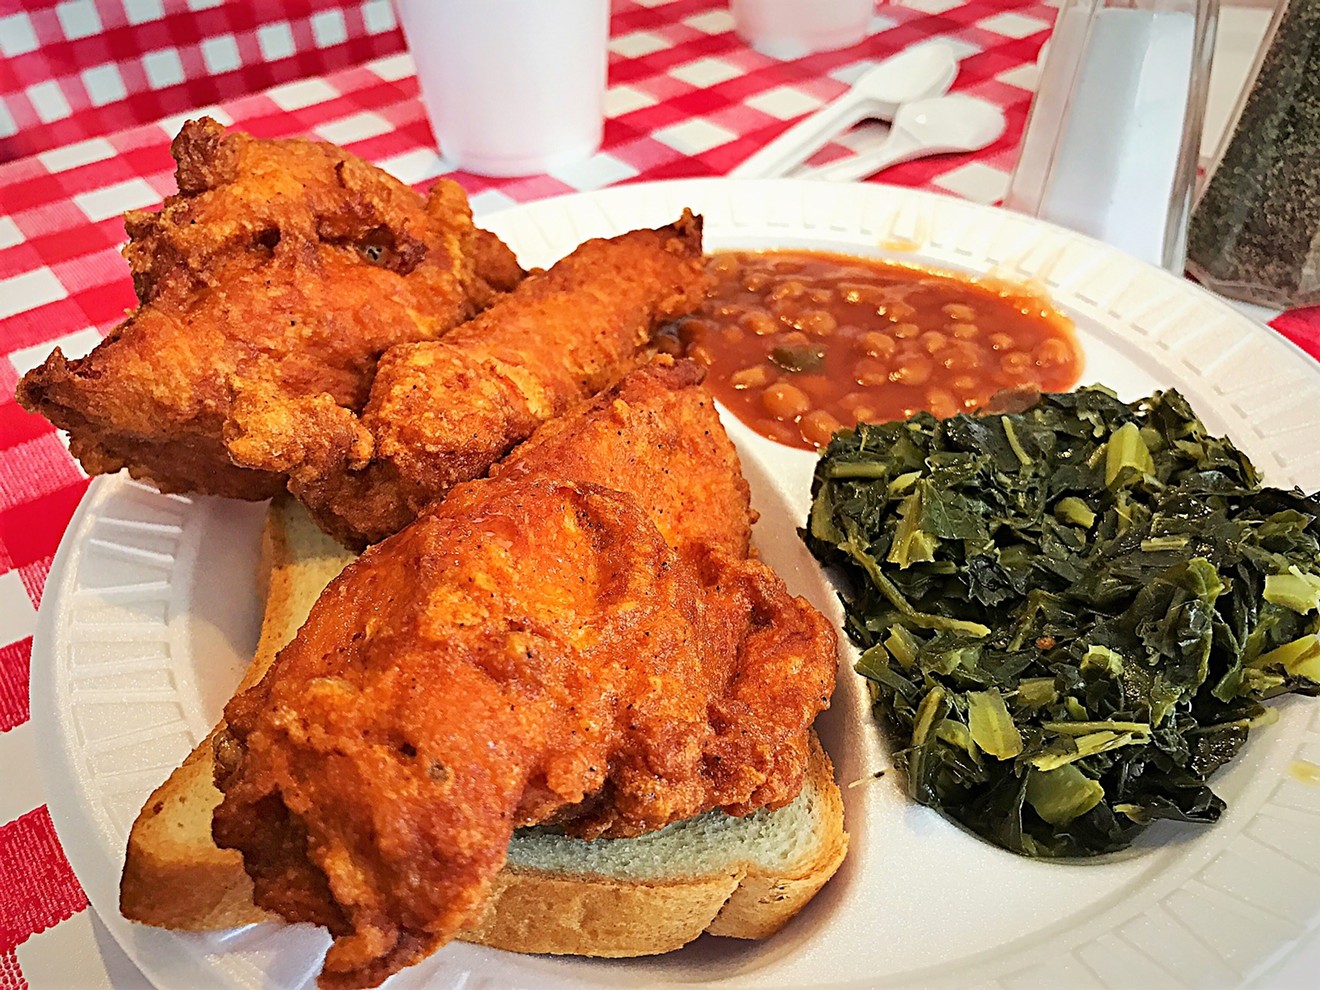 Gus's World Famous Fried Chicken is coming to Houston this spring.